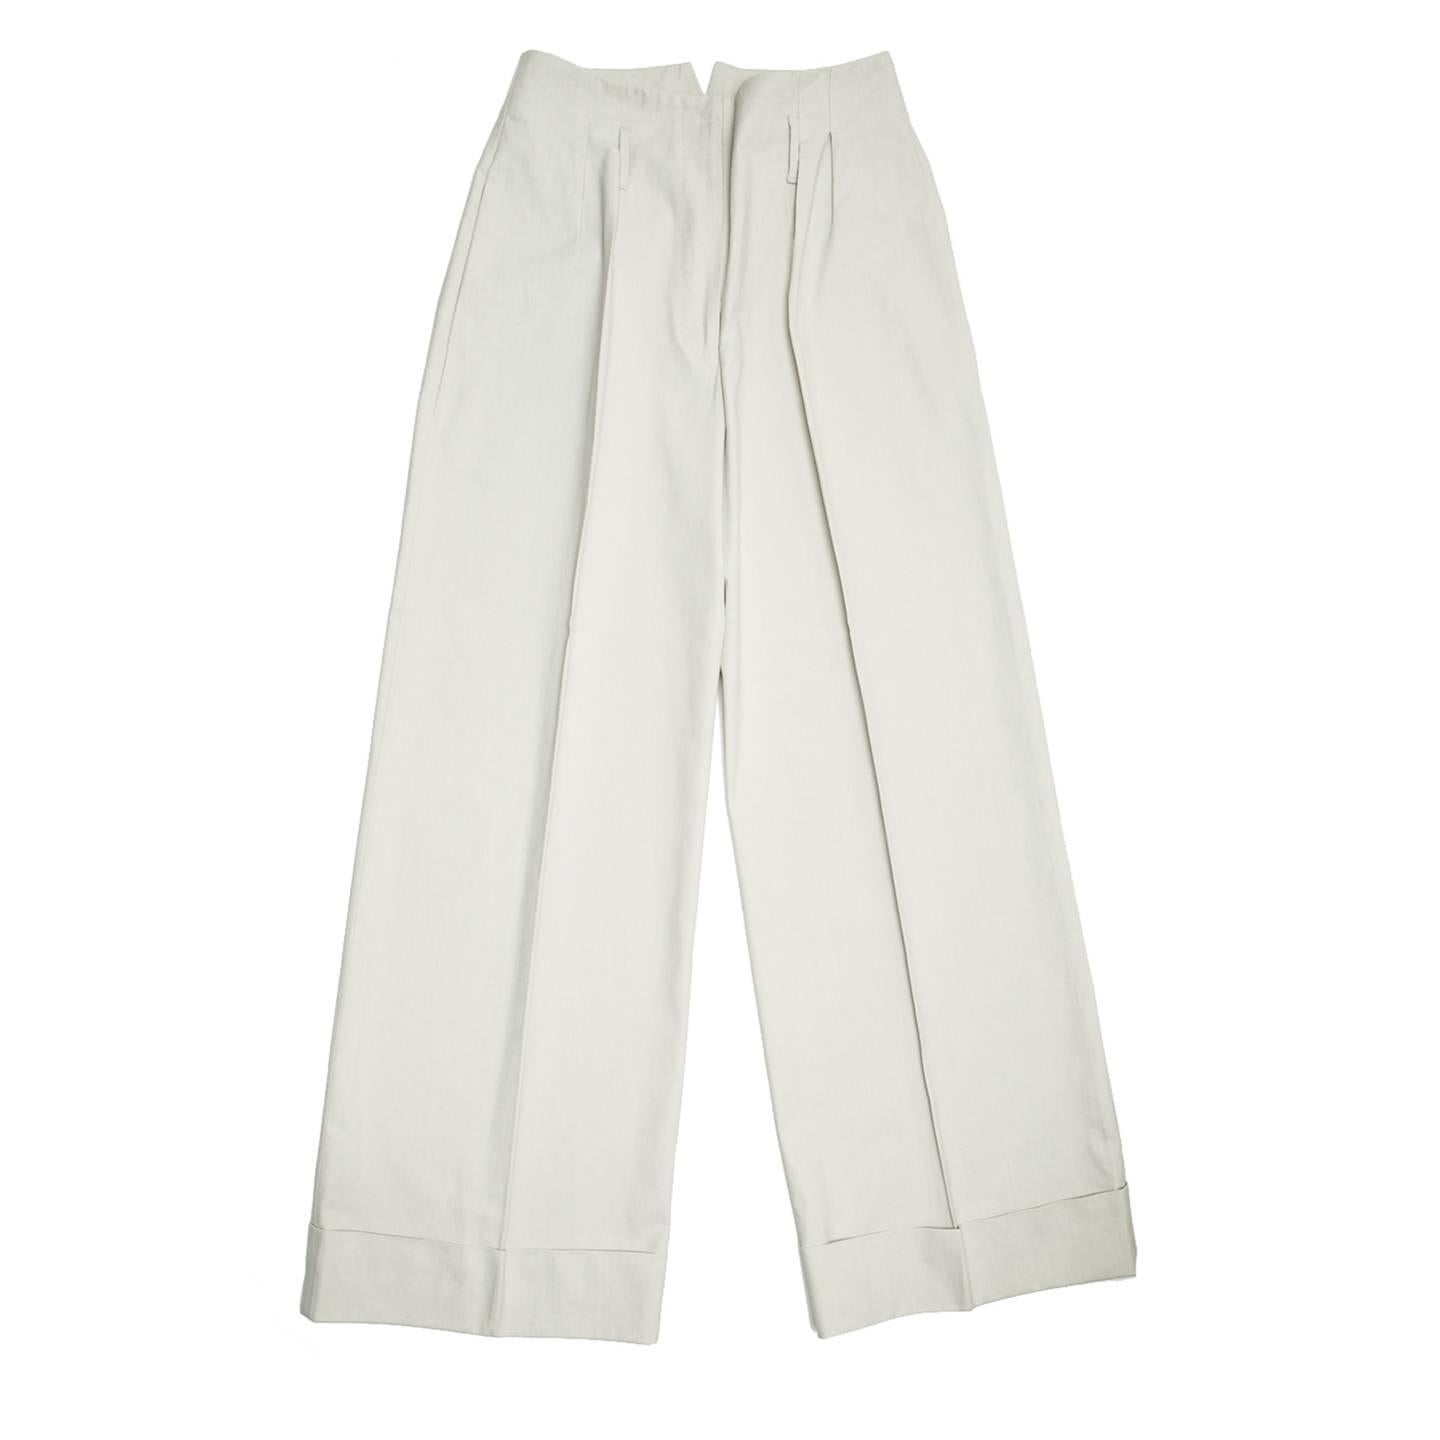 Stella McCartney ecru cotton suit pleated high waisted trousers with very wide fit, slash pockets at side seams, a slit pocket on back left side and wide turn-ups.

Size  44 Italian sizing

Condition  Excellent: never worn